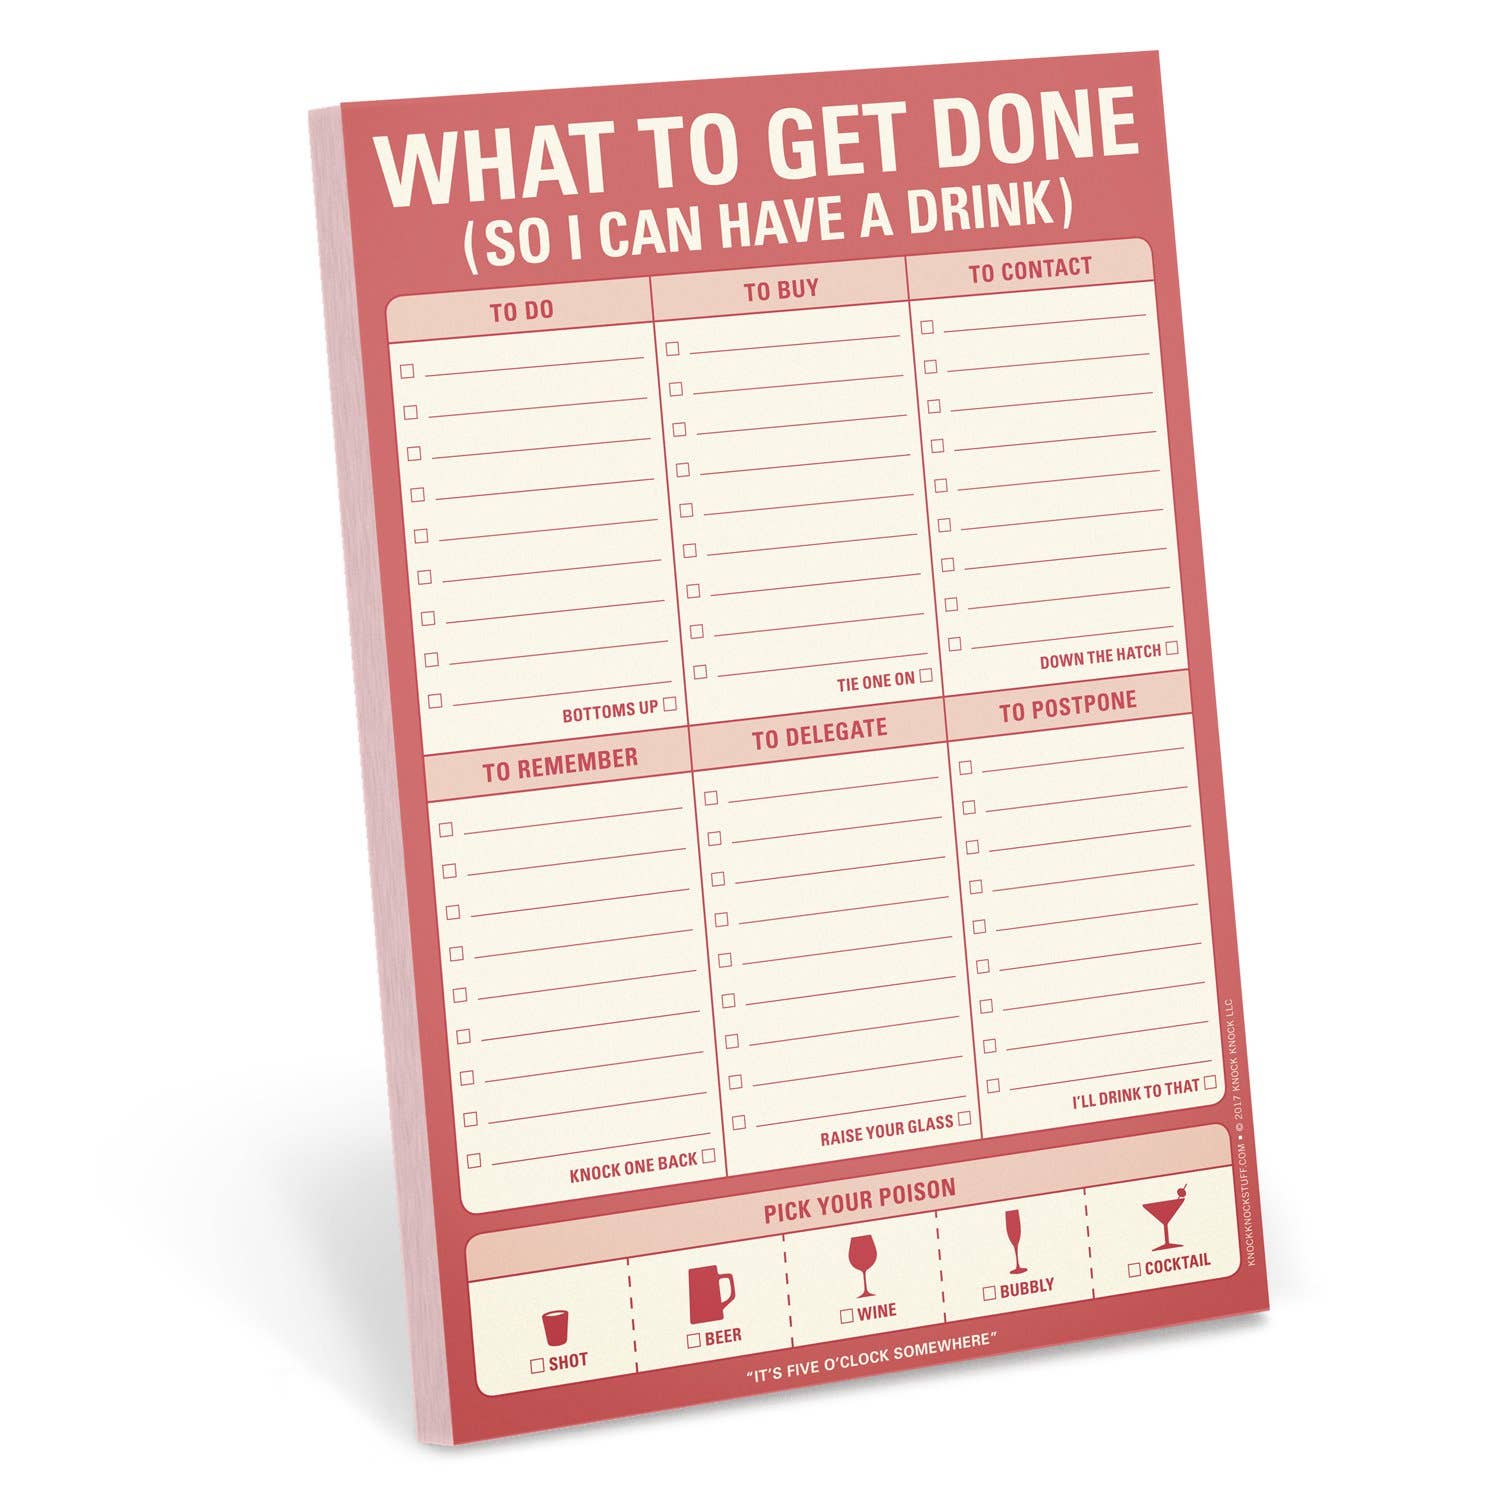 What To Get Done (So I Can Have a Drink) Pad